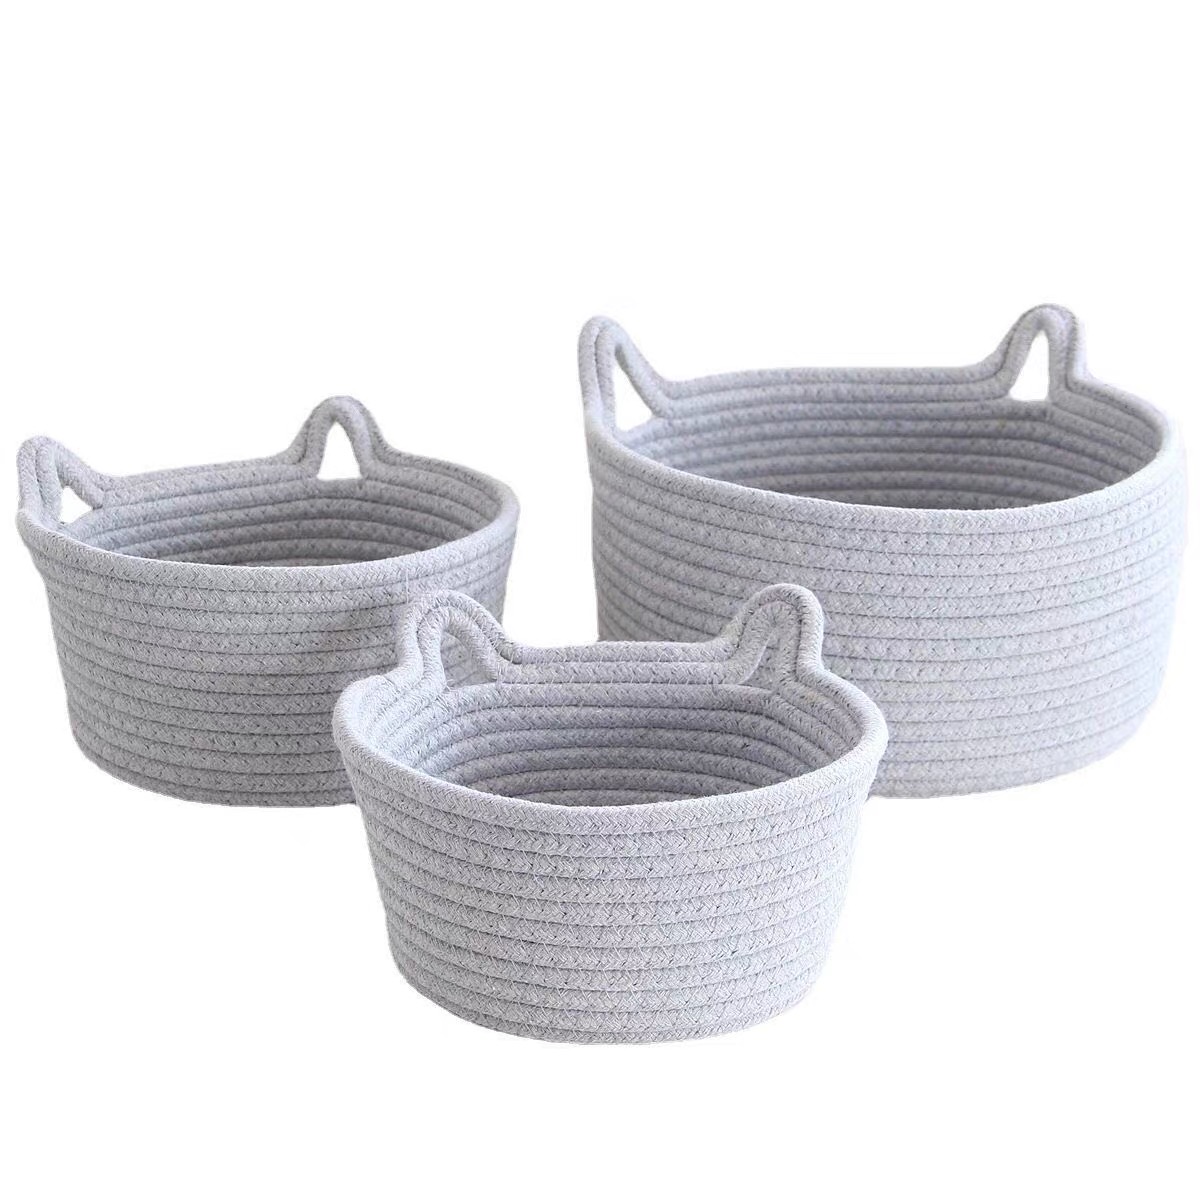 Goodiebag Cat Ear Woven Storage Basket Gray Small Size  18*10cm